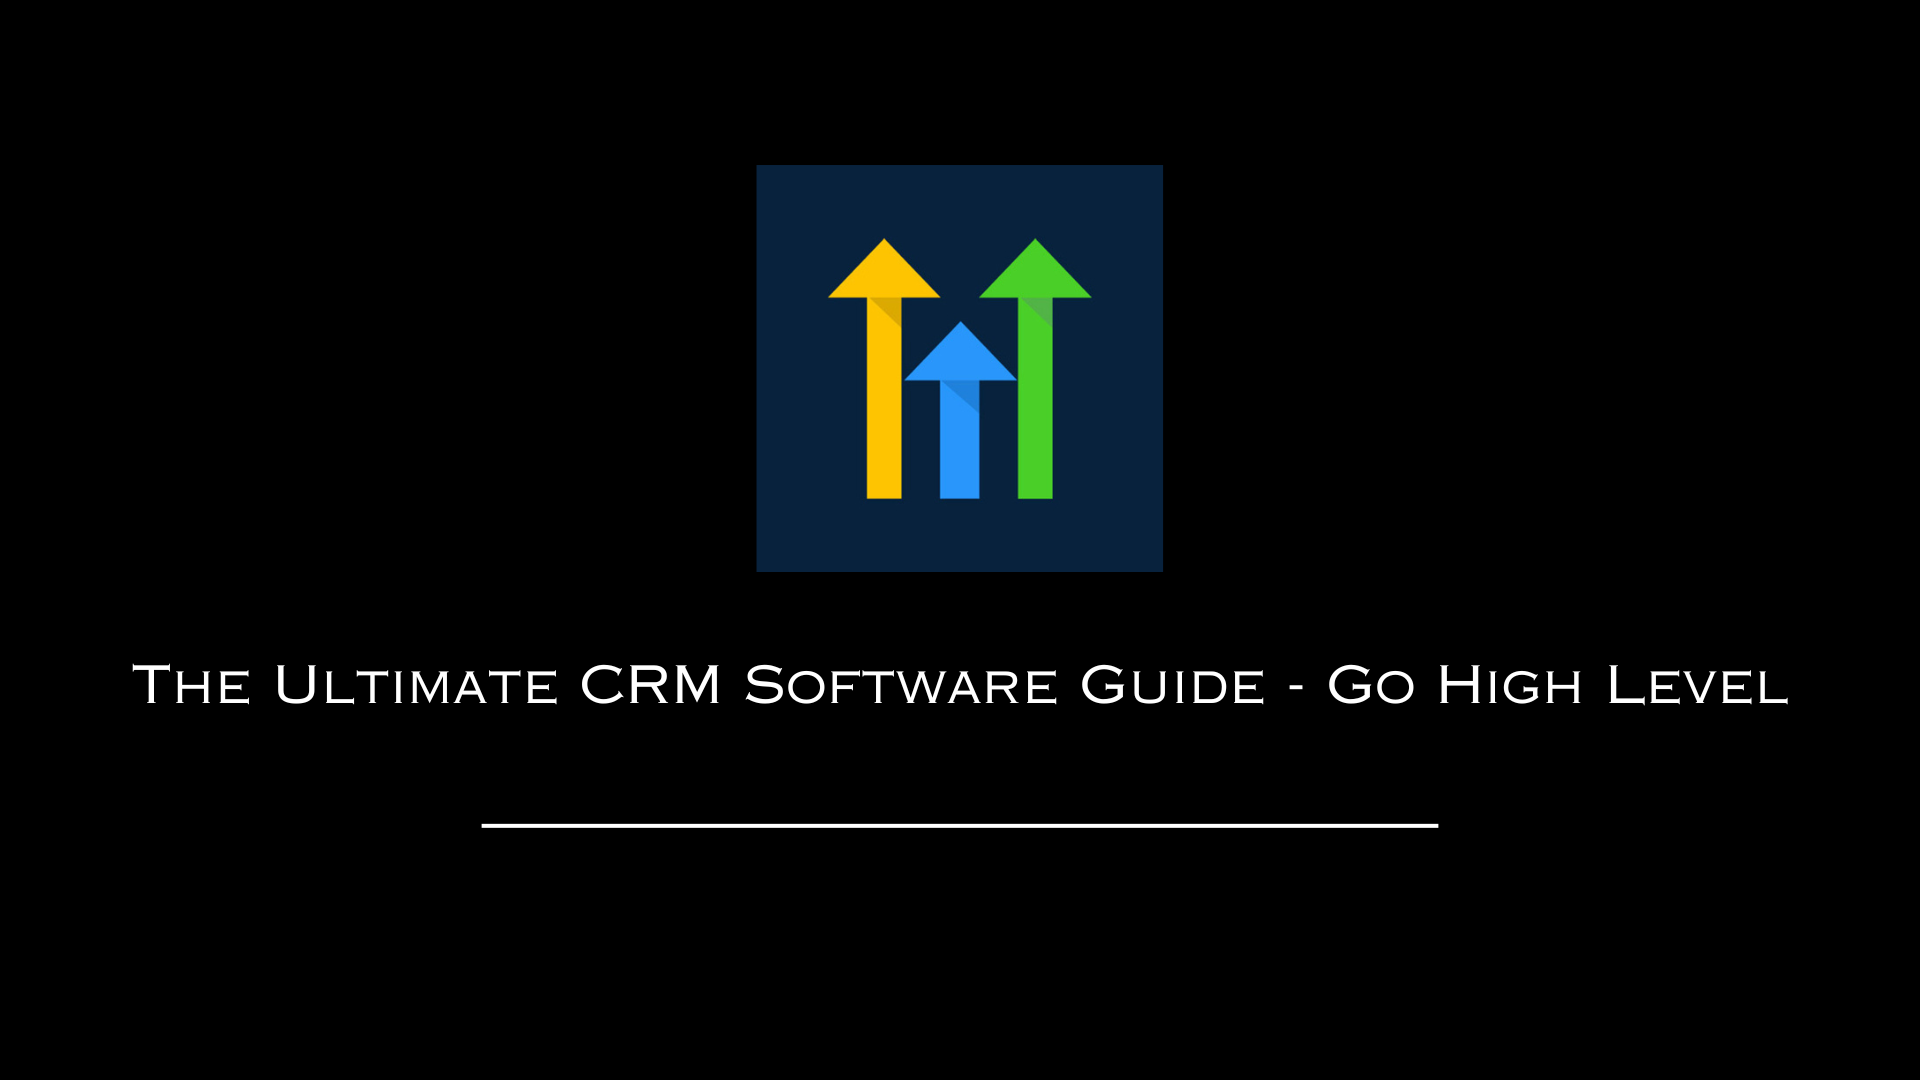 The Ultimate CRM Software Guide - Go High Level